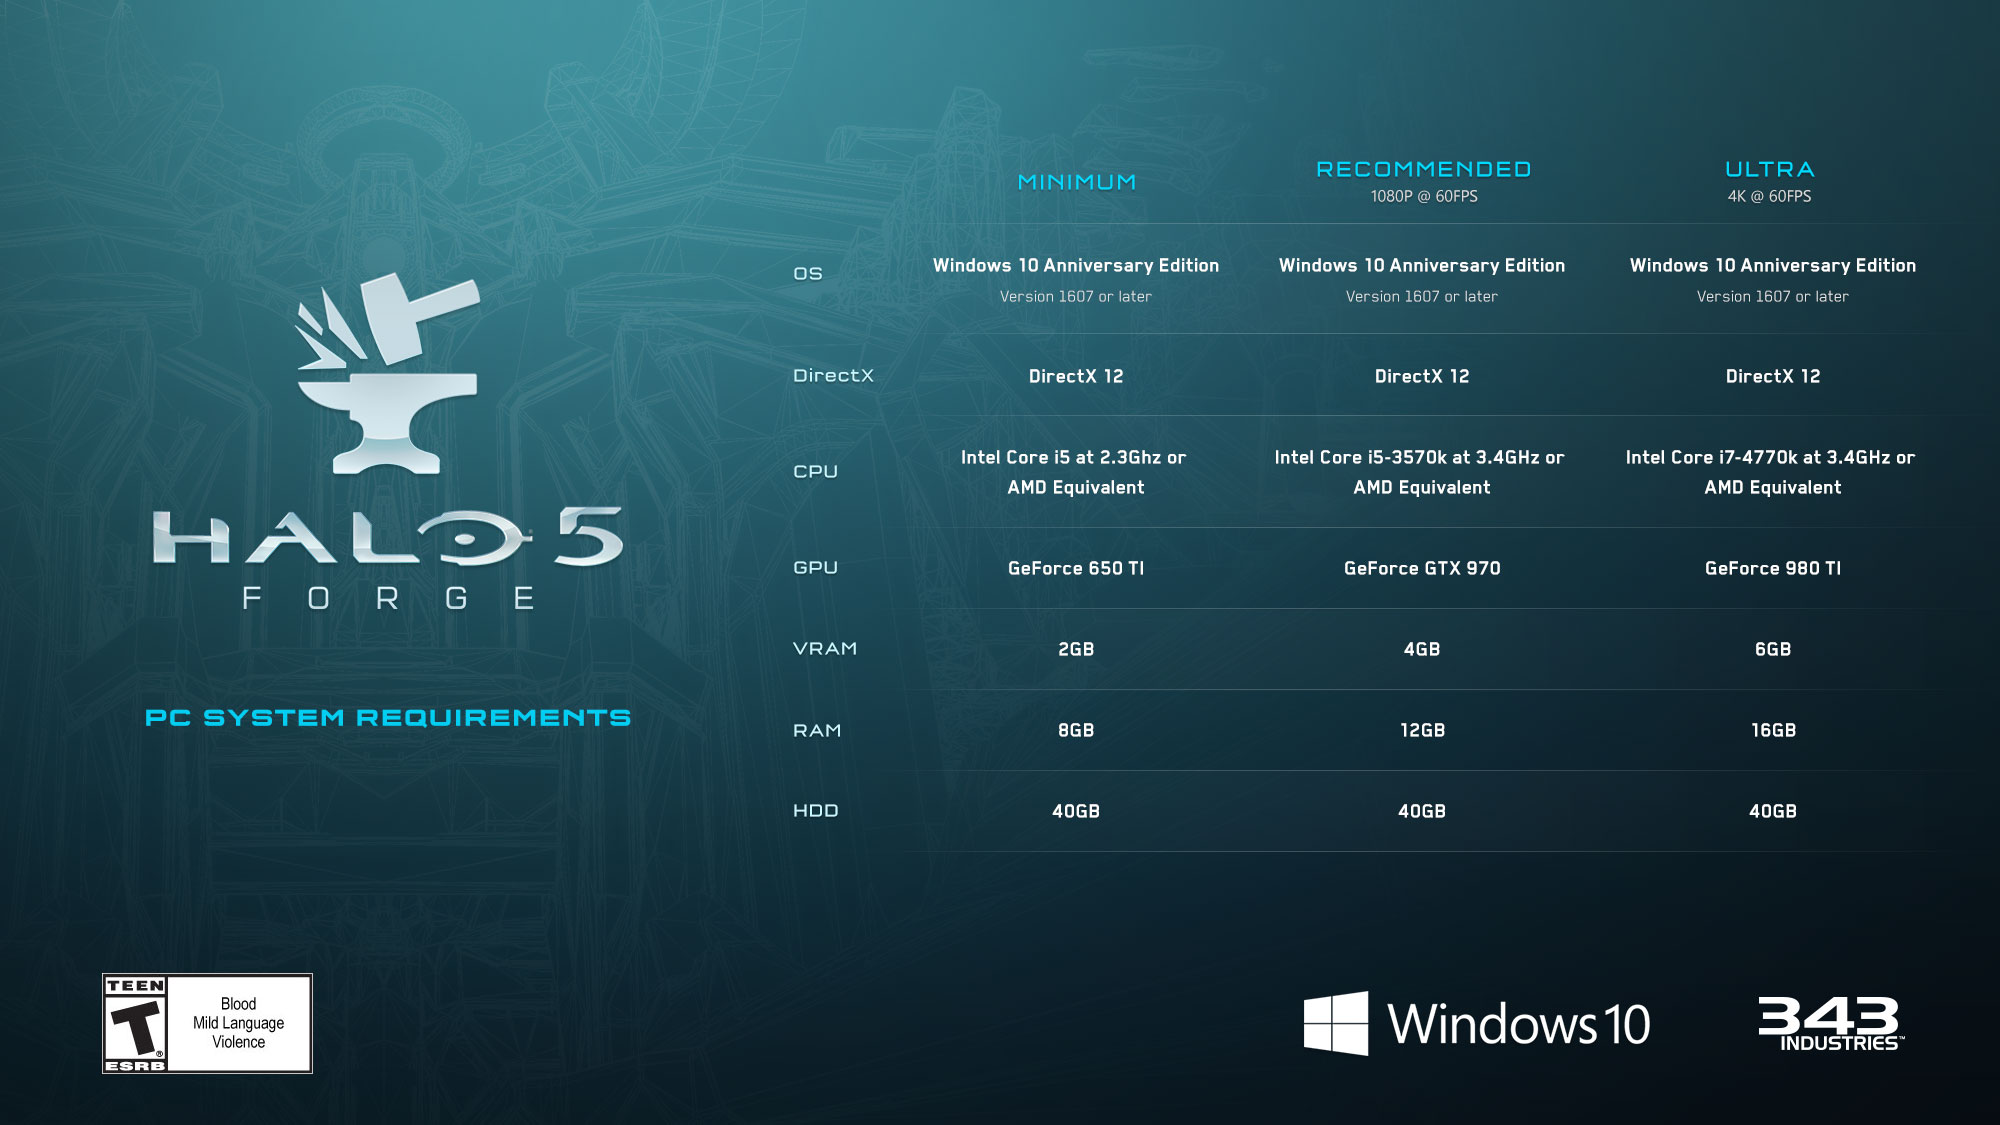 Halo 5 Forge System Requirements